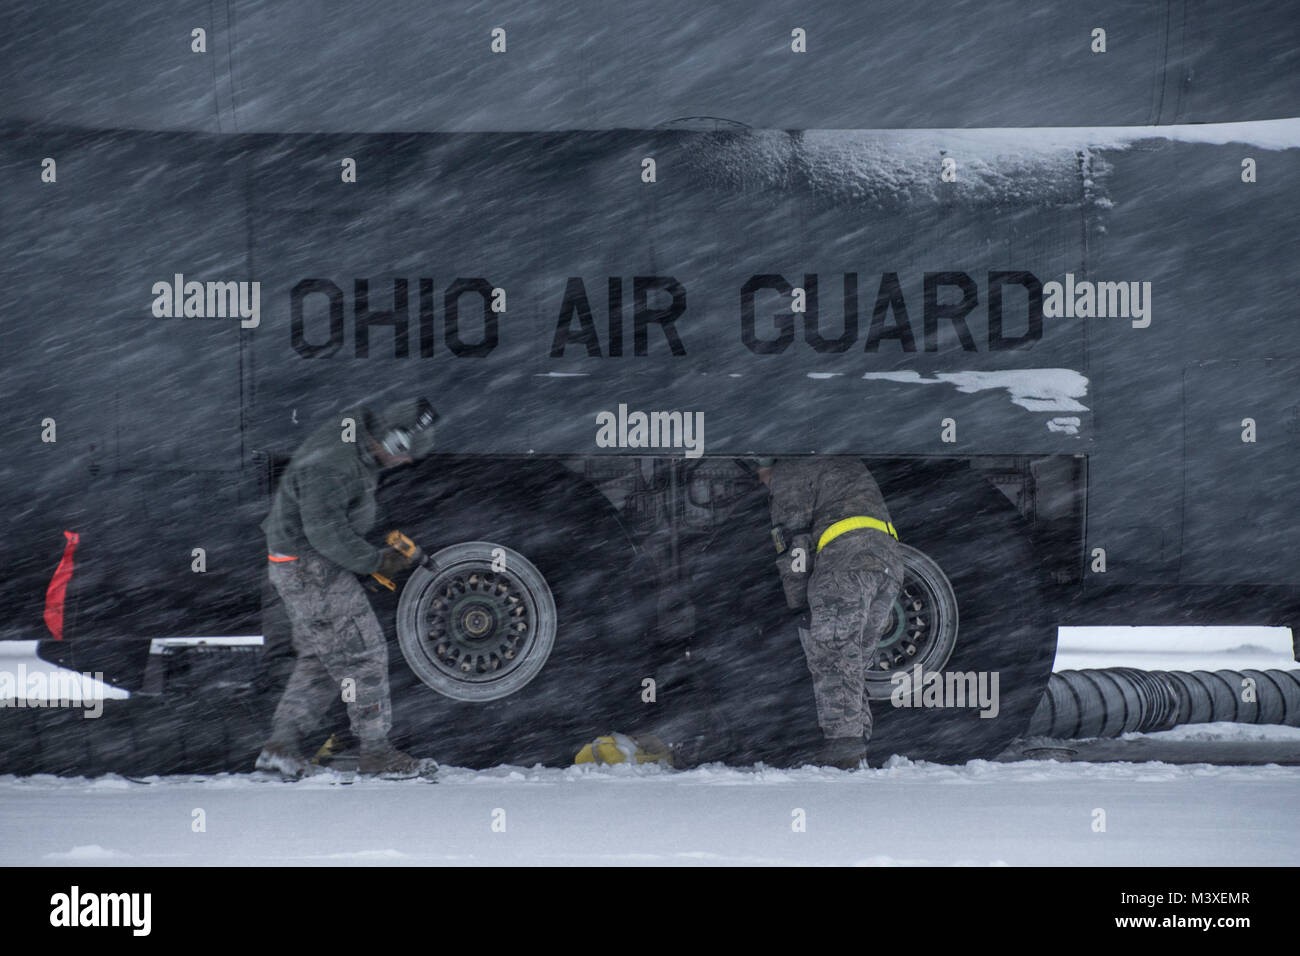 Airmen work on the brake systems of a C-130H Hercules during a snow storm, Feb. 07, 2018, at the 179th Airlift Wing, Mansfield, Ohio. The 179th Airlift Wing maintenance group regularly inspects all aspects of their aircraft to maintain mission readiness with ready airmen and ready aircraft. (U.S. Air National Guard photo by Tech. Sgt. Joe HarwoodReleased) Stock Photo